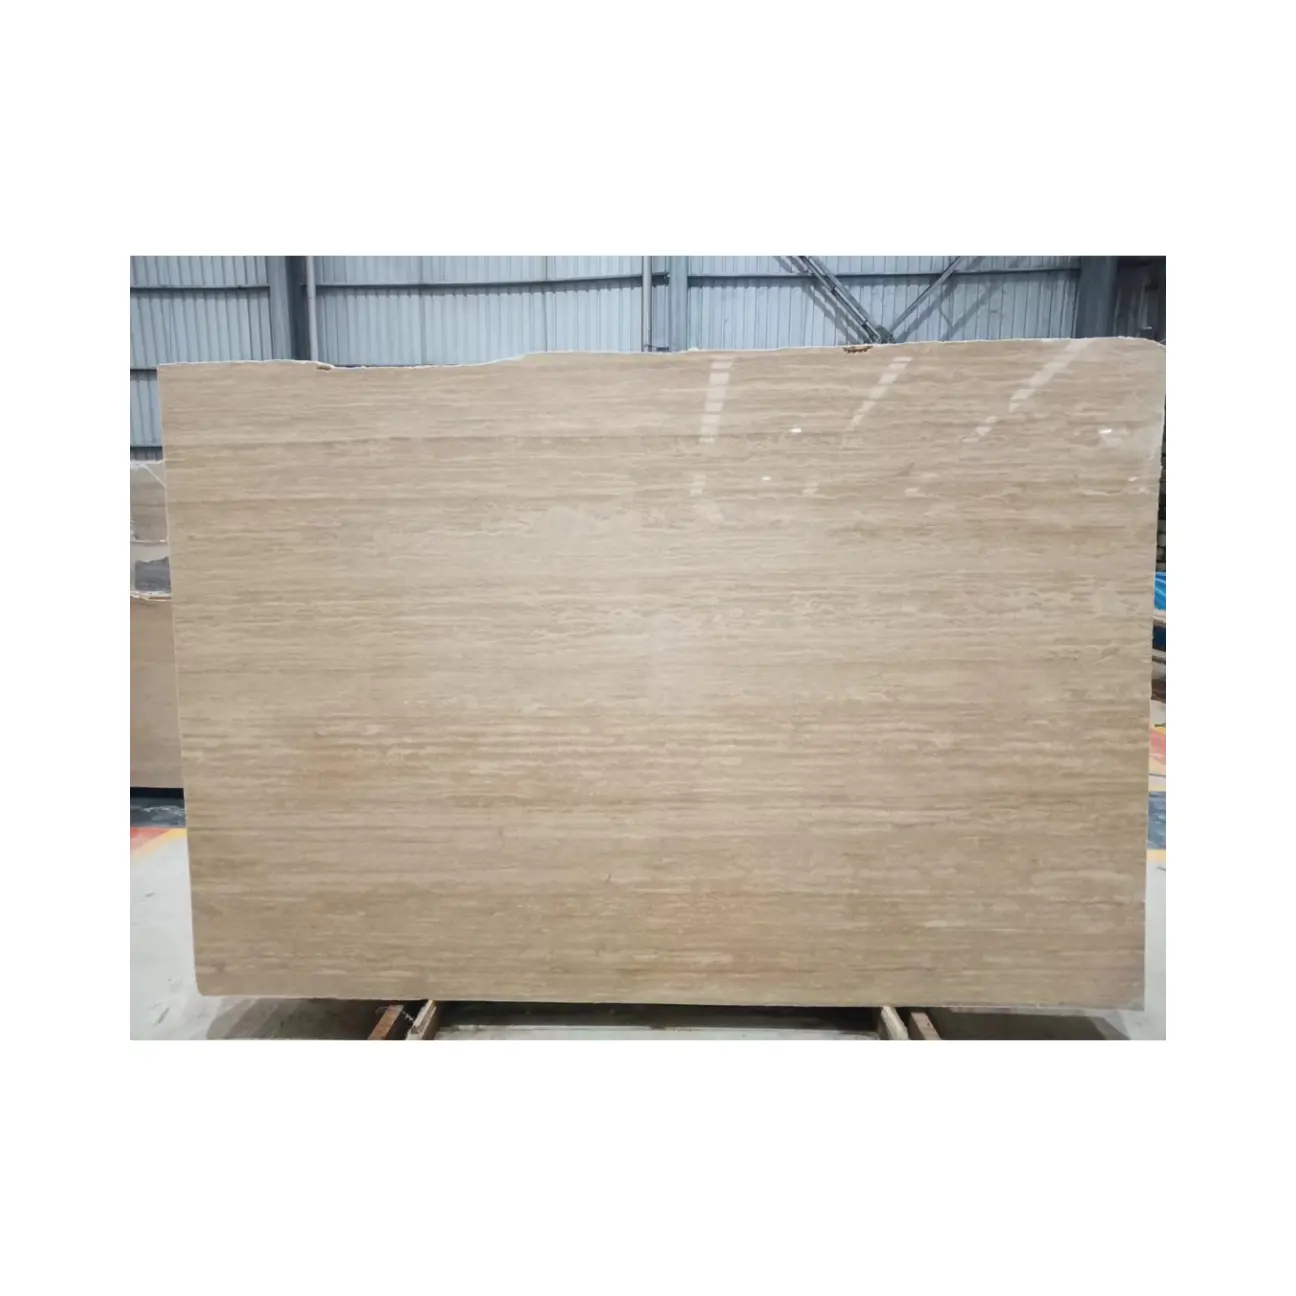 Turkish Travertine Marble Natural Stone Travertine Stone Flooring Marble Tiles Travertine Stone Slab Tiles for Wall Cladding